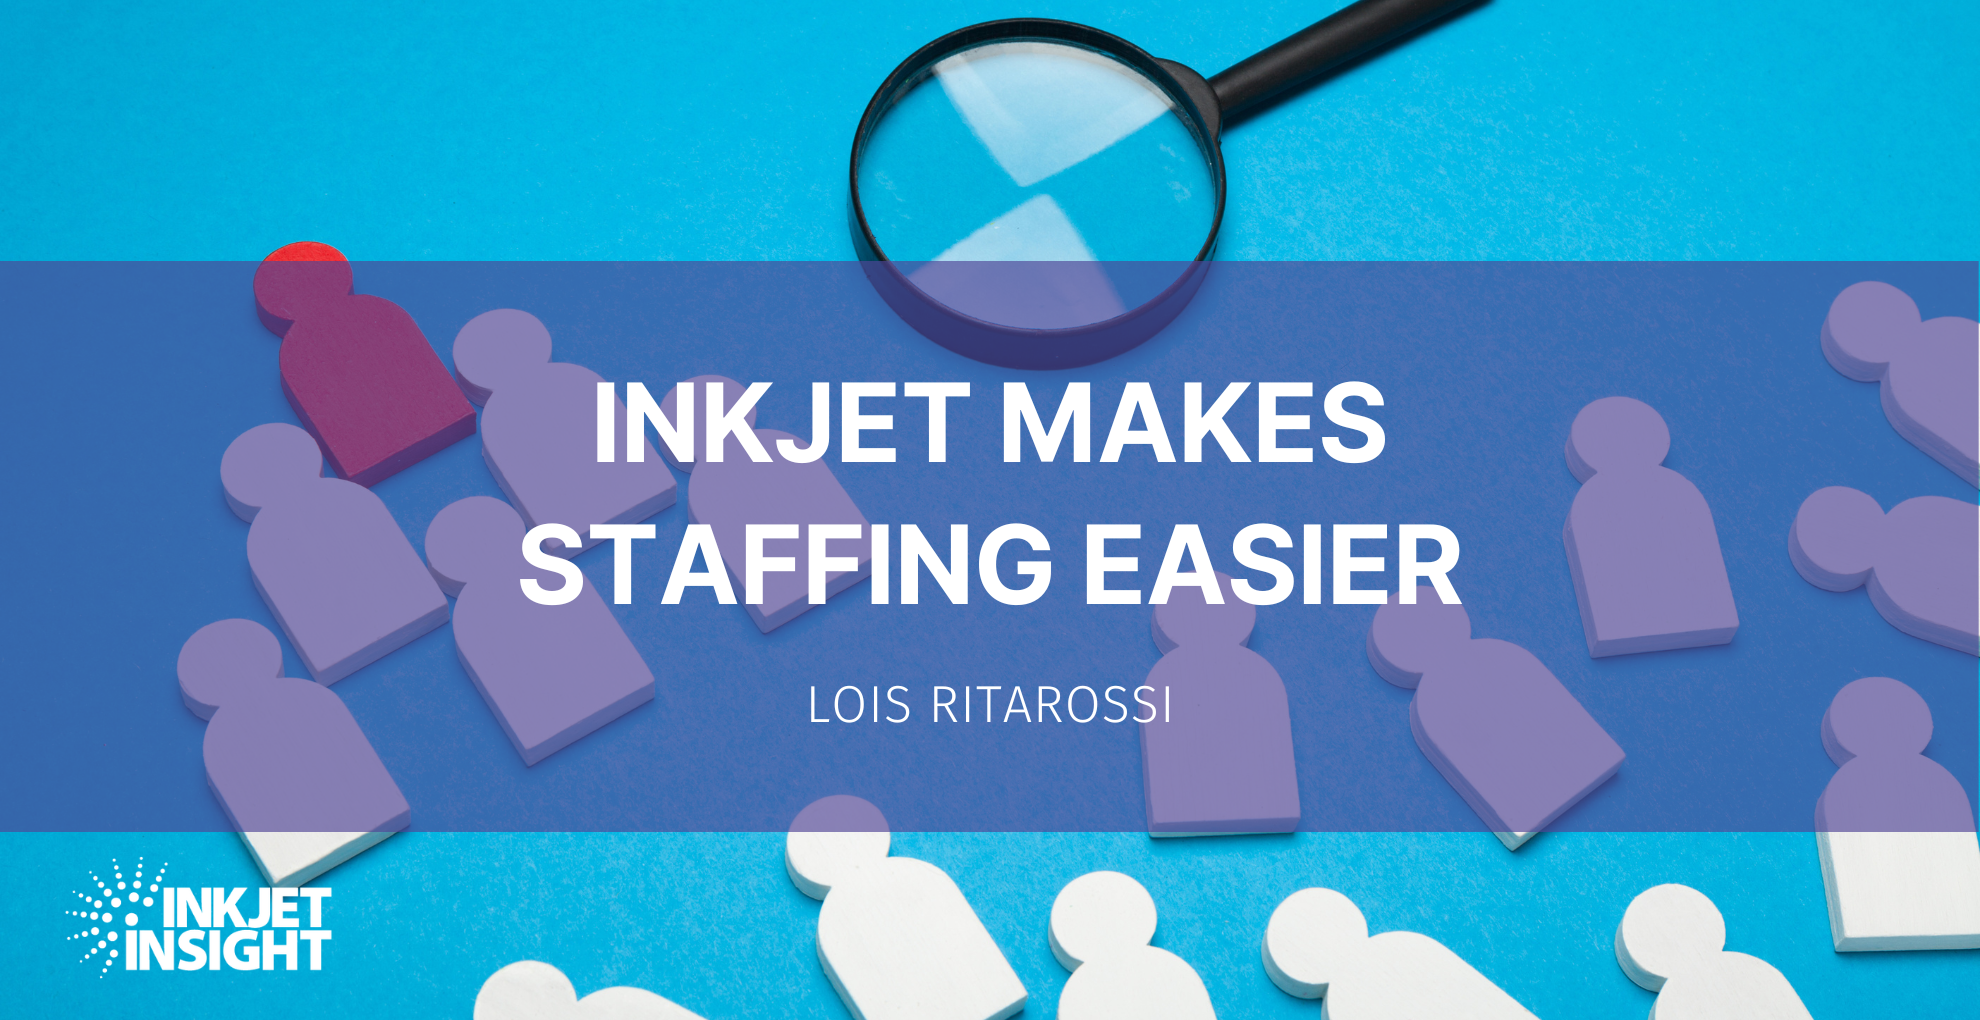 Featured image for “Inkjet Makes Staffing Easier”